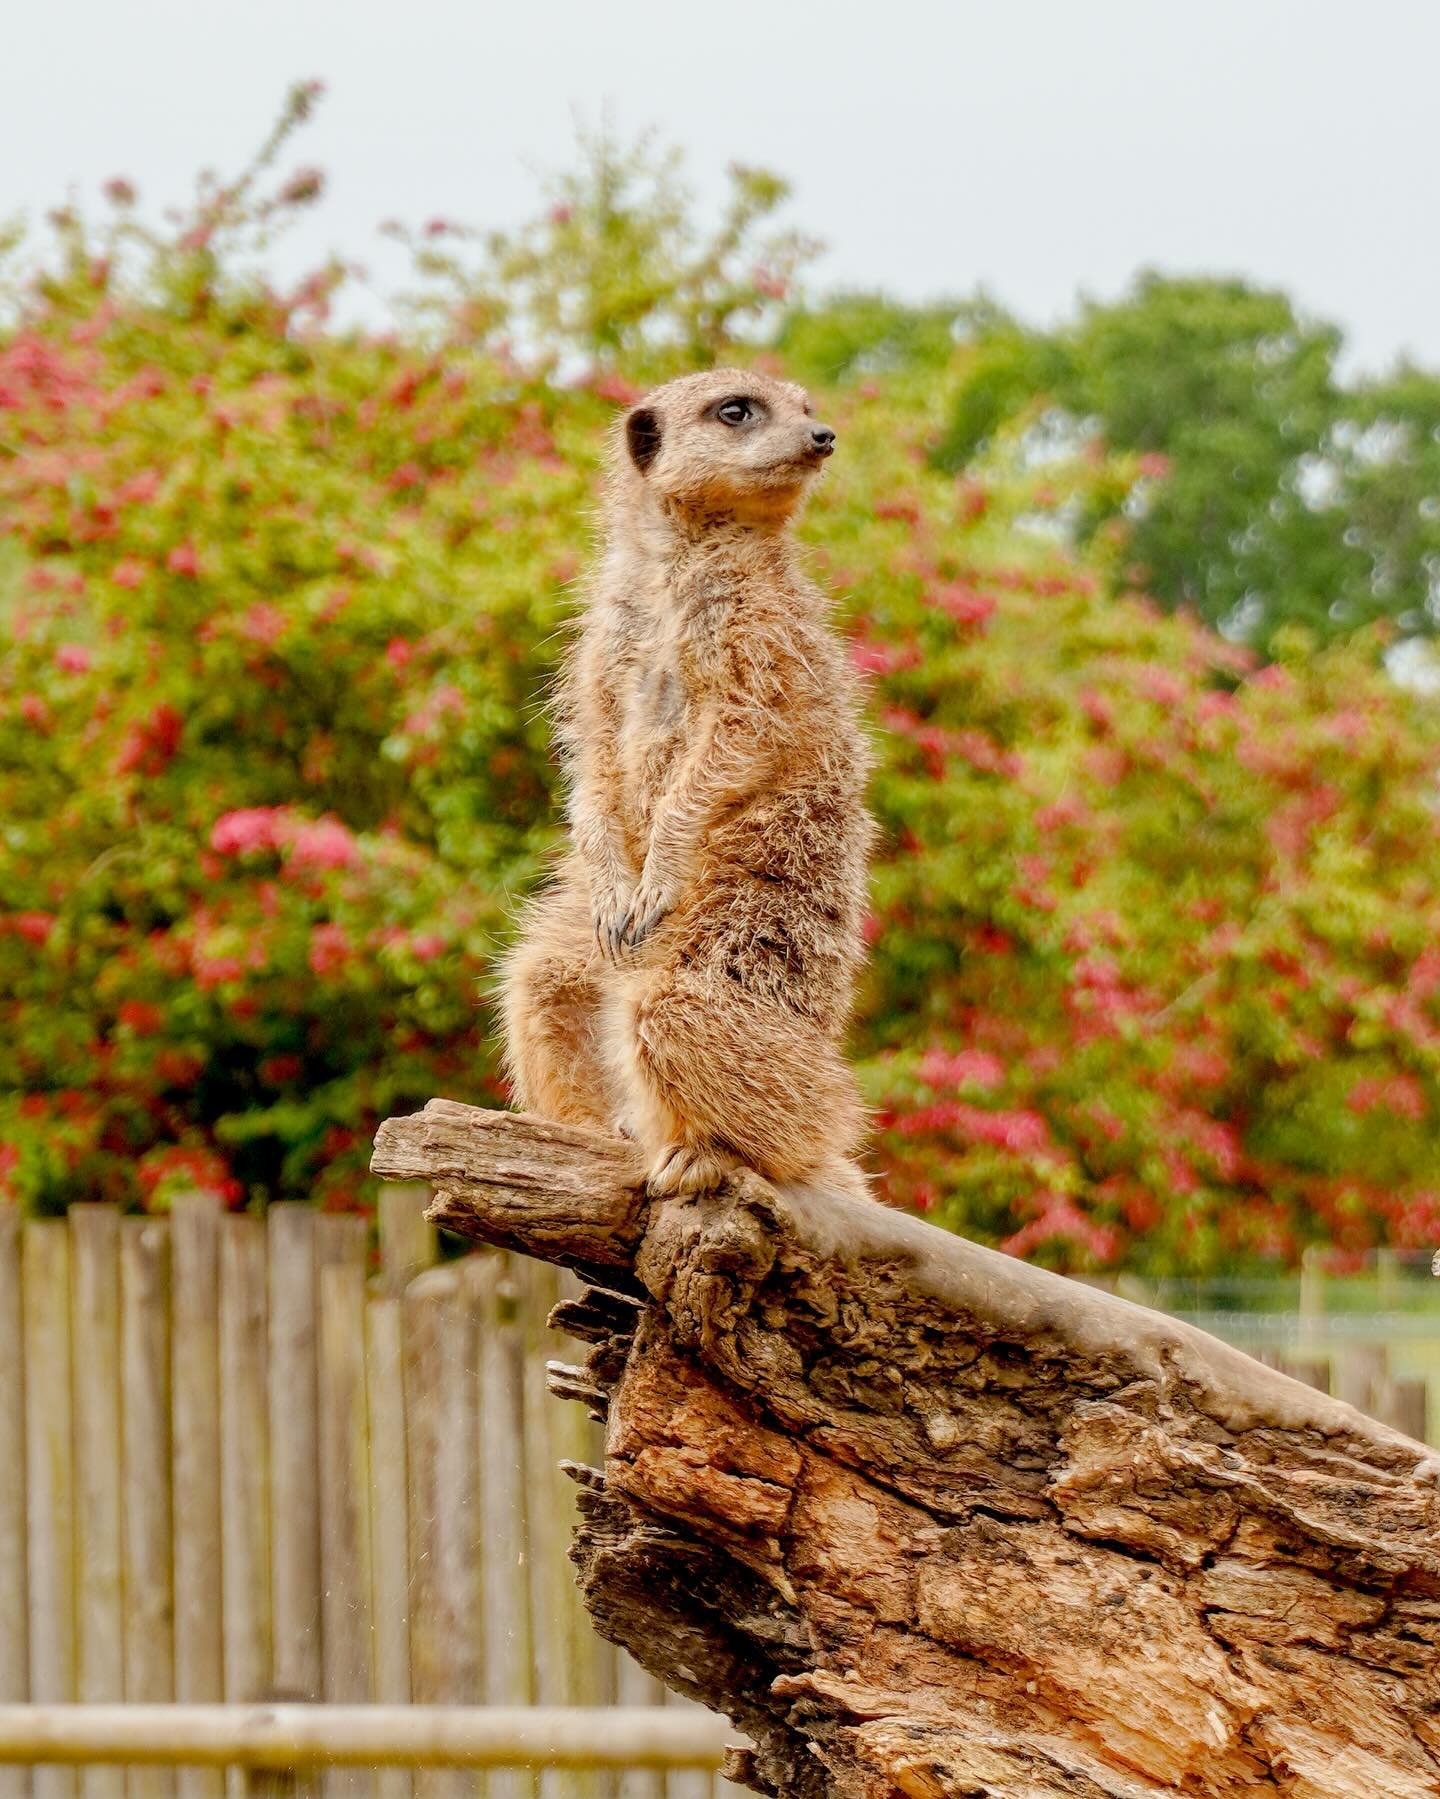 4 hours later and here are some of my fave snaps. Captured this majestic #meerkat and all the other animals that came out to say hello @marwellzoo
🦓🦒🦘🦌🦥🦛🐦&zwj;⬛🐒 #marwellzoo #marwellwildlife #marwellzoologicalpark #winchesteruk